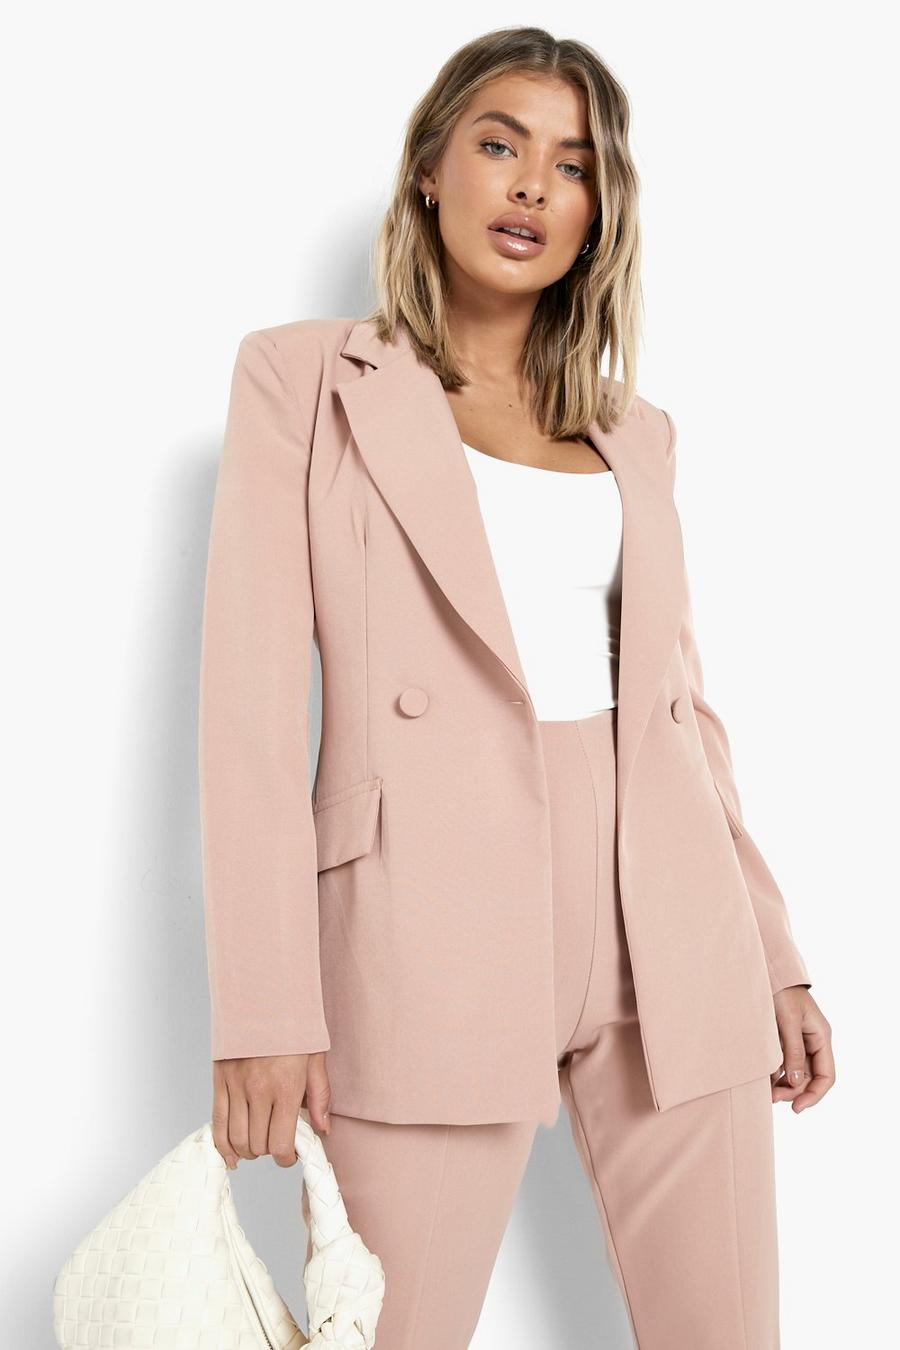 Wedding Guest Suits  Trouser Suits For Female Wedding Guests